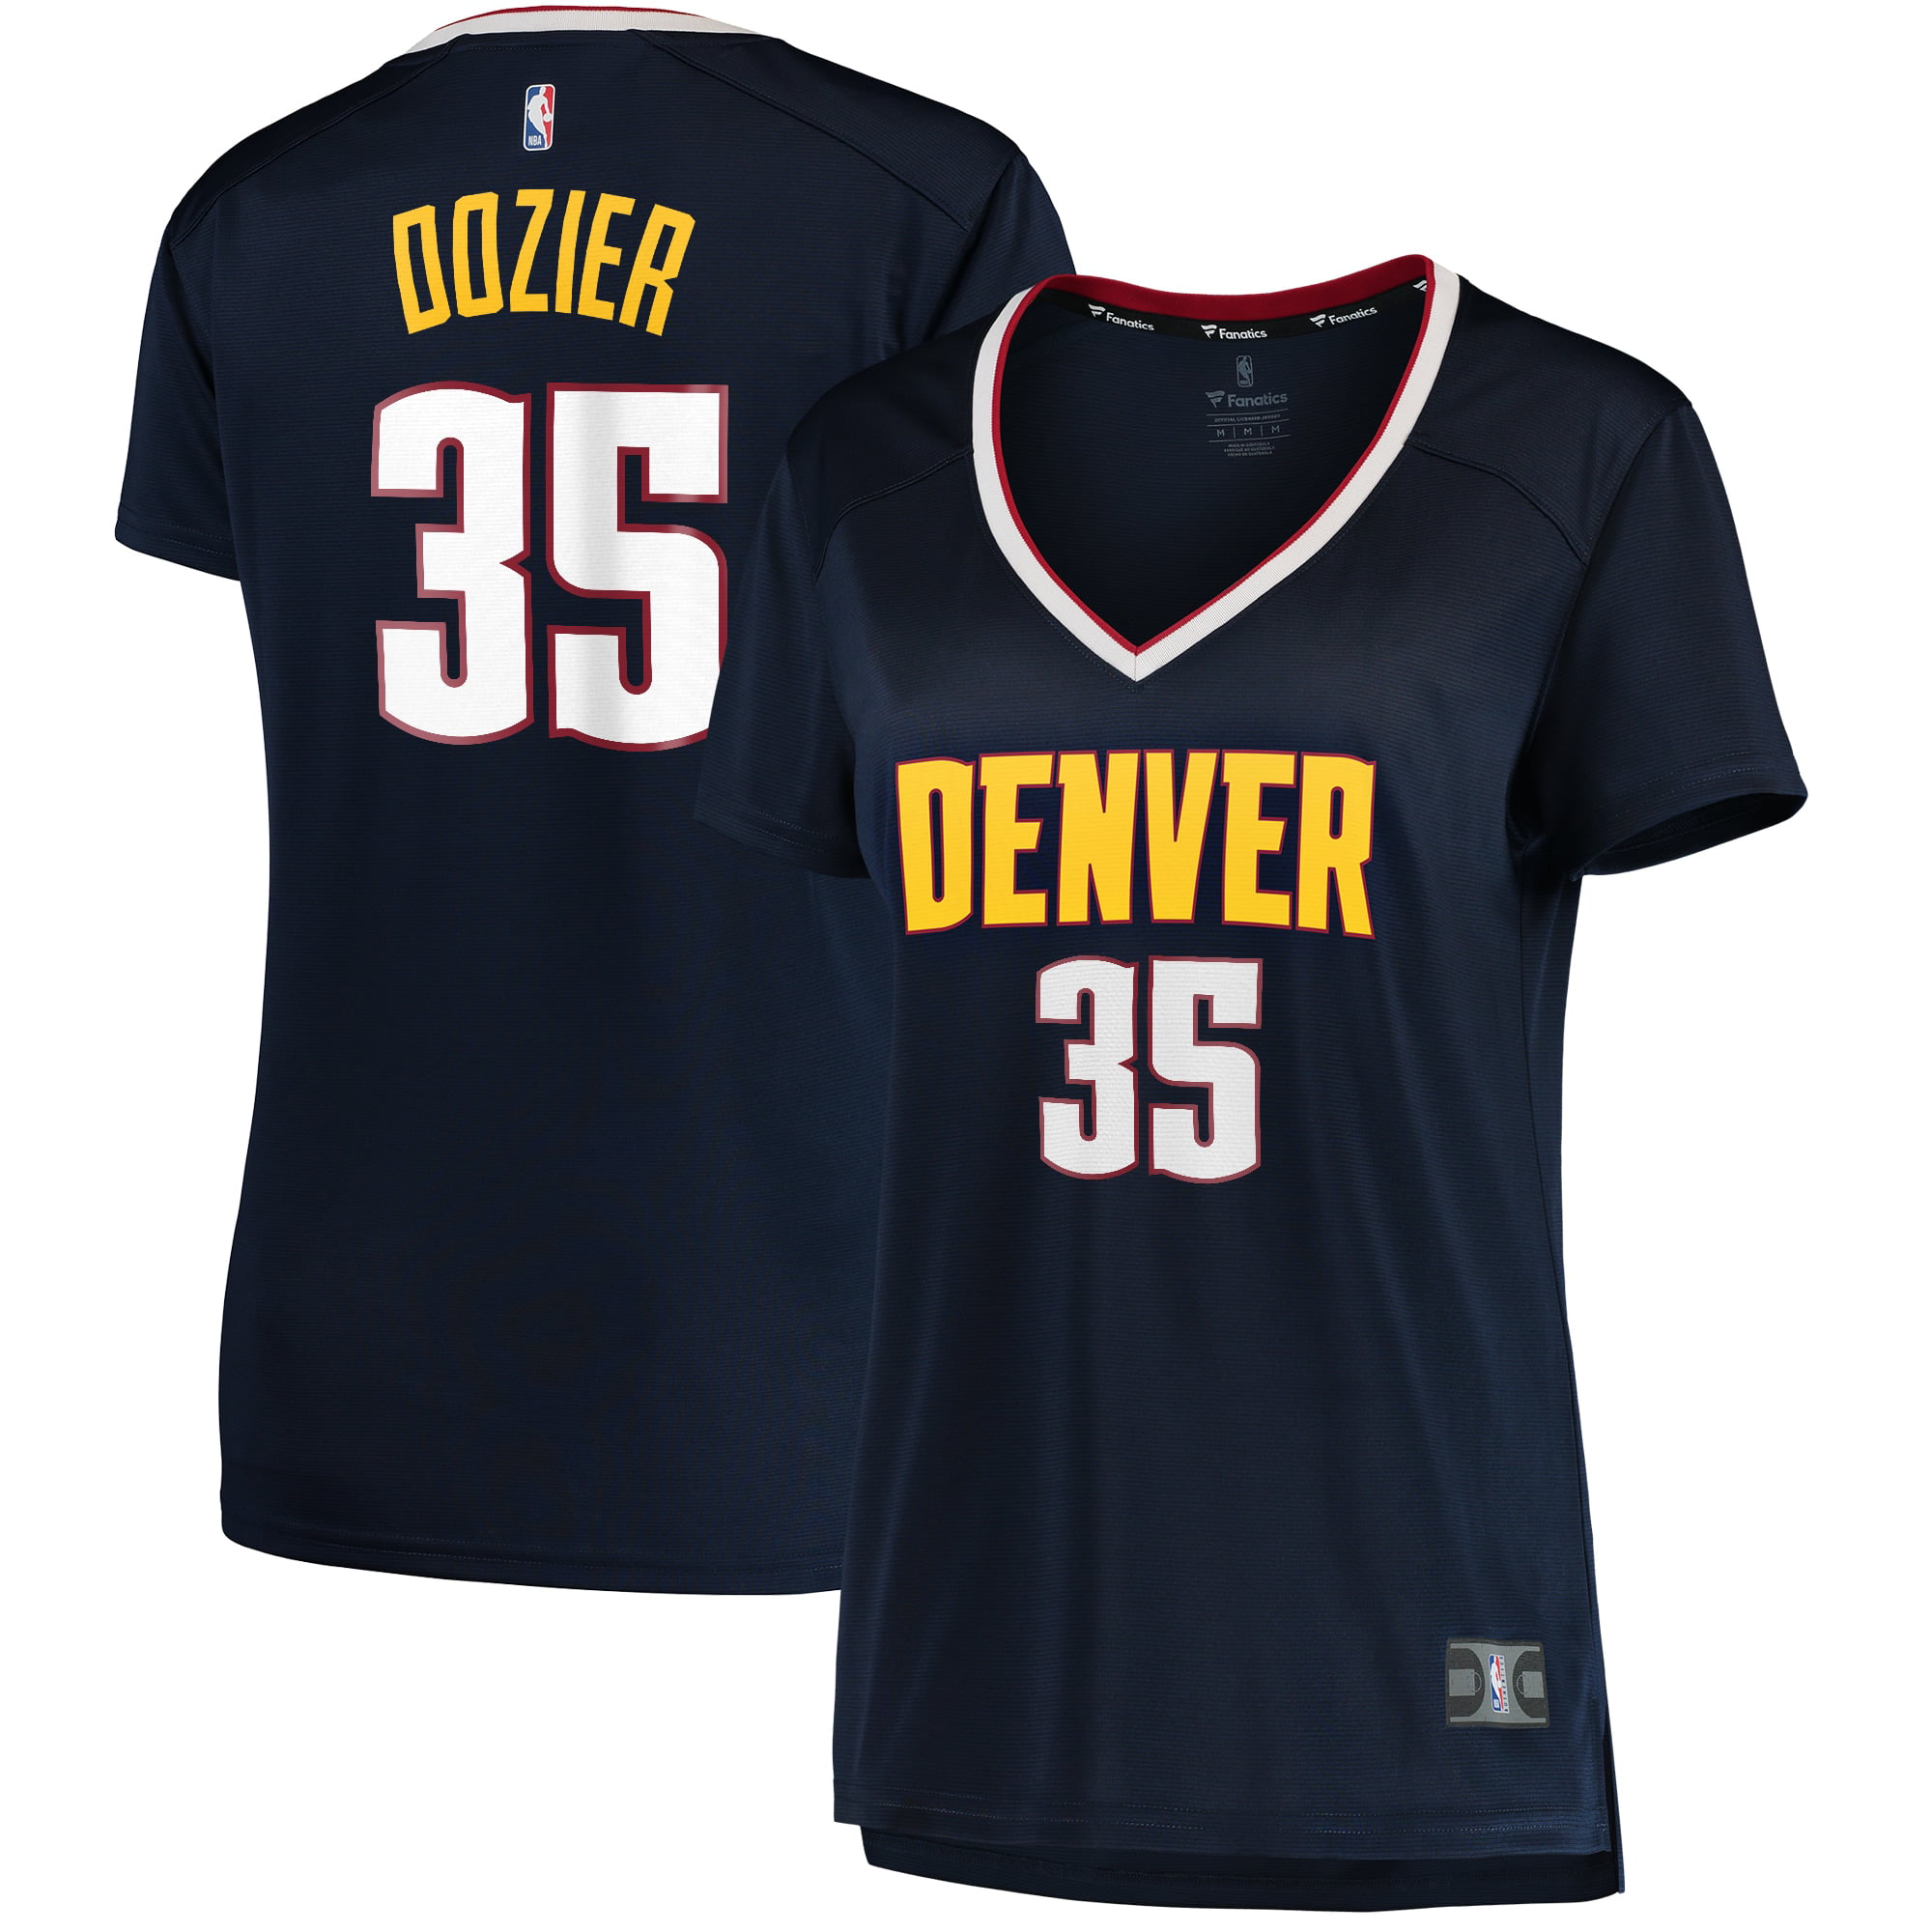 dozier all star jersey